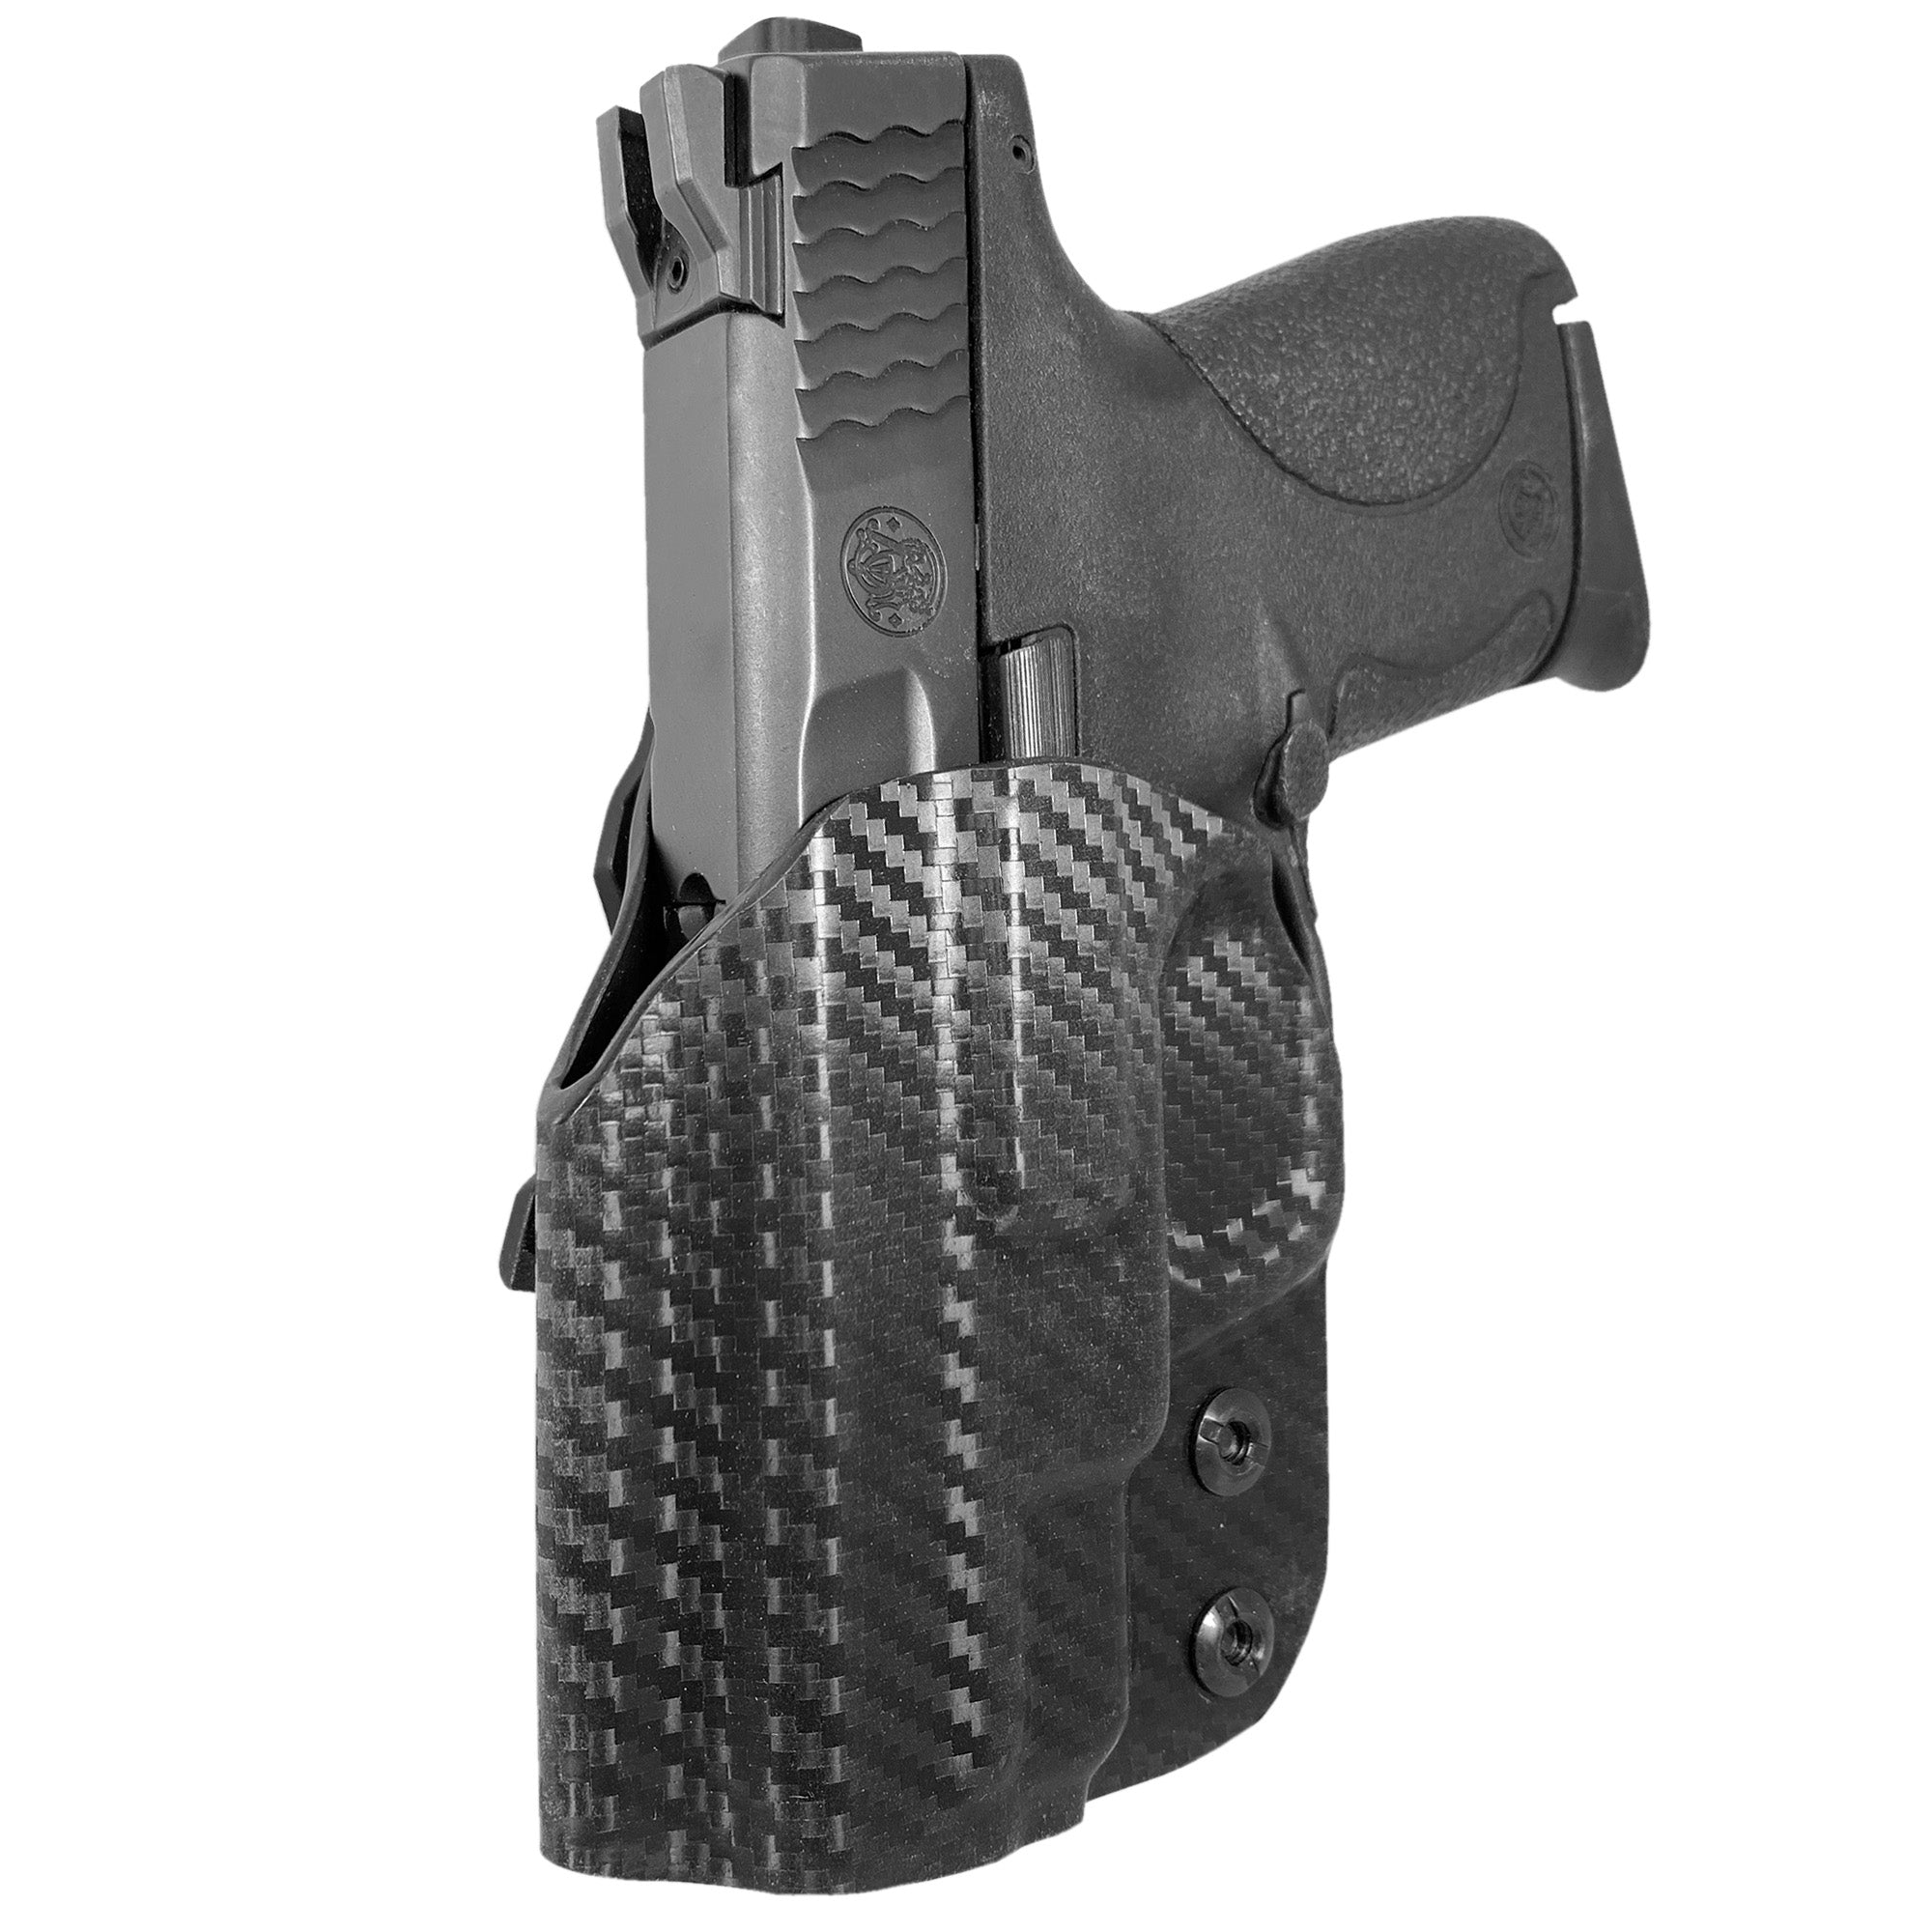 Smith & Wesson MP Shield IWB Kydex Holster - Low Profile